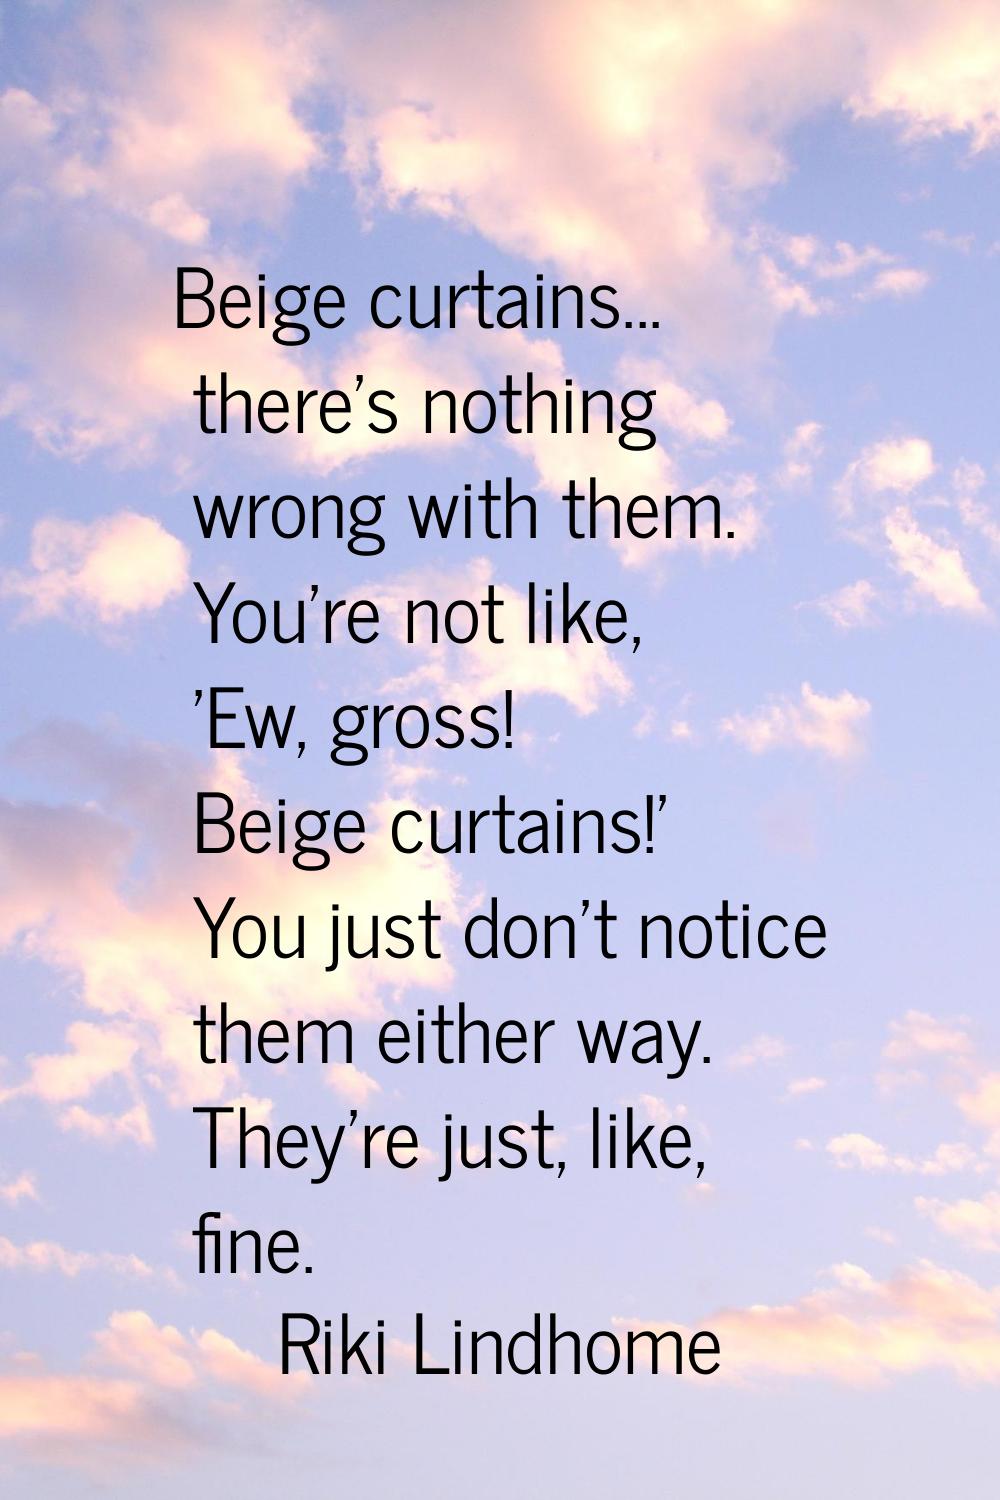 Beige curtains... there's nothing wrong with them. You're not like, 'Ew, gross! Beige curtains!' Yo